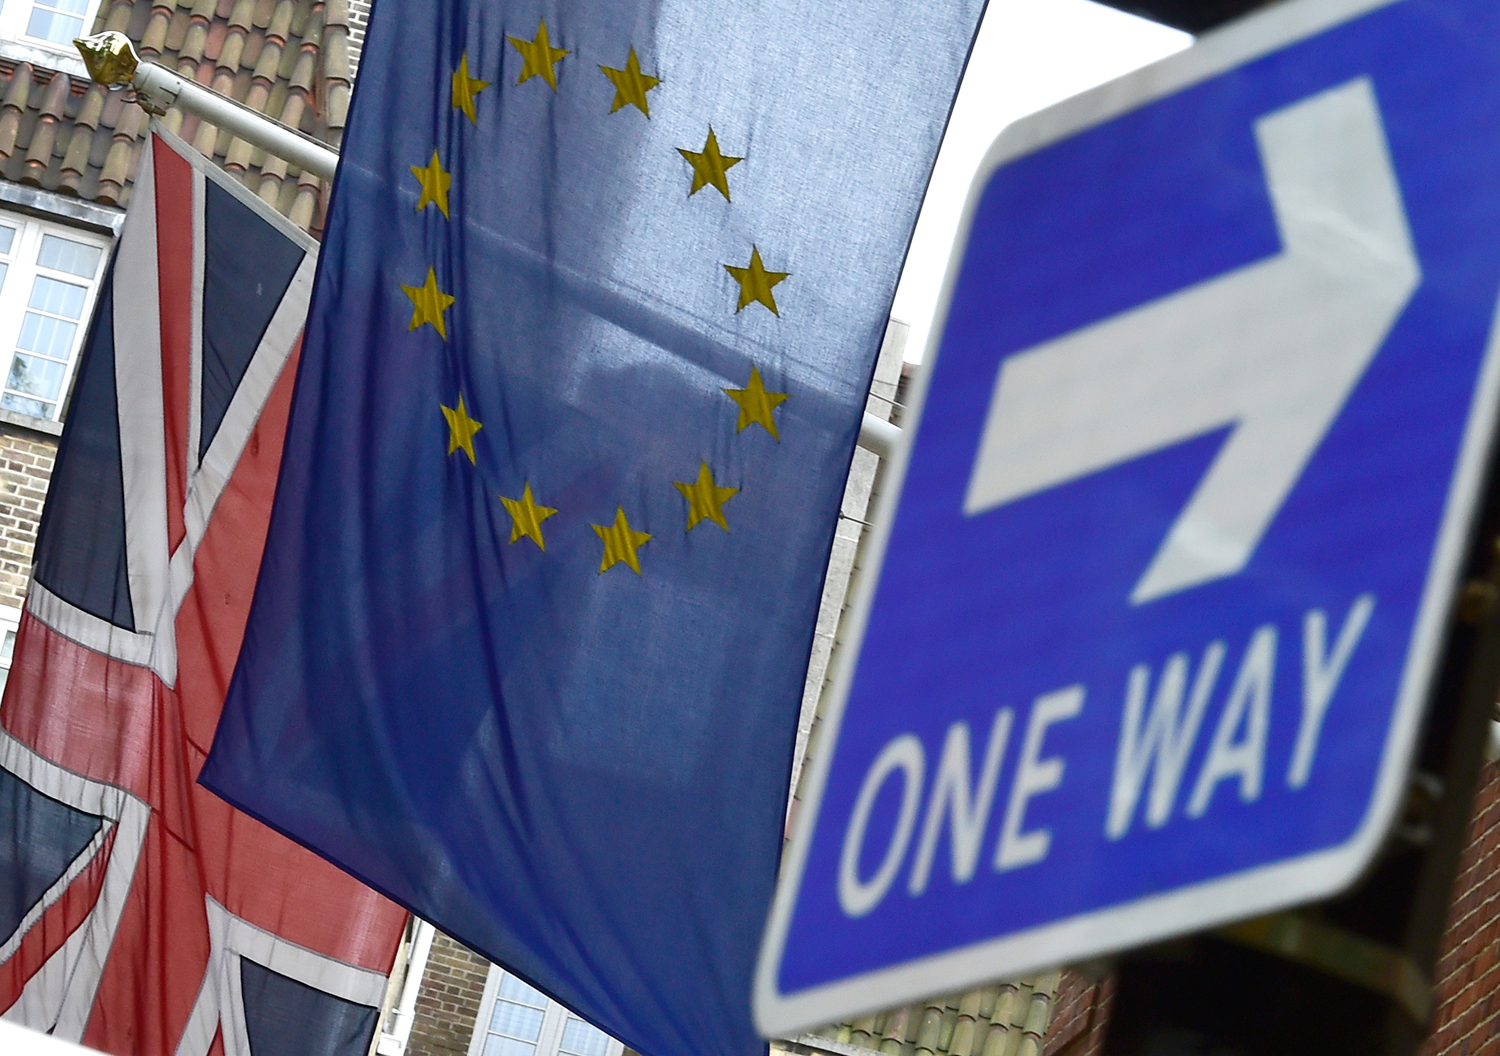 The British Union flag and European Union flag are seen hanging outside Europe House in central London